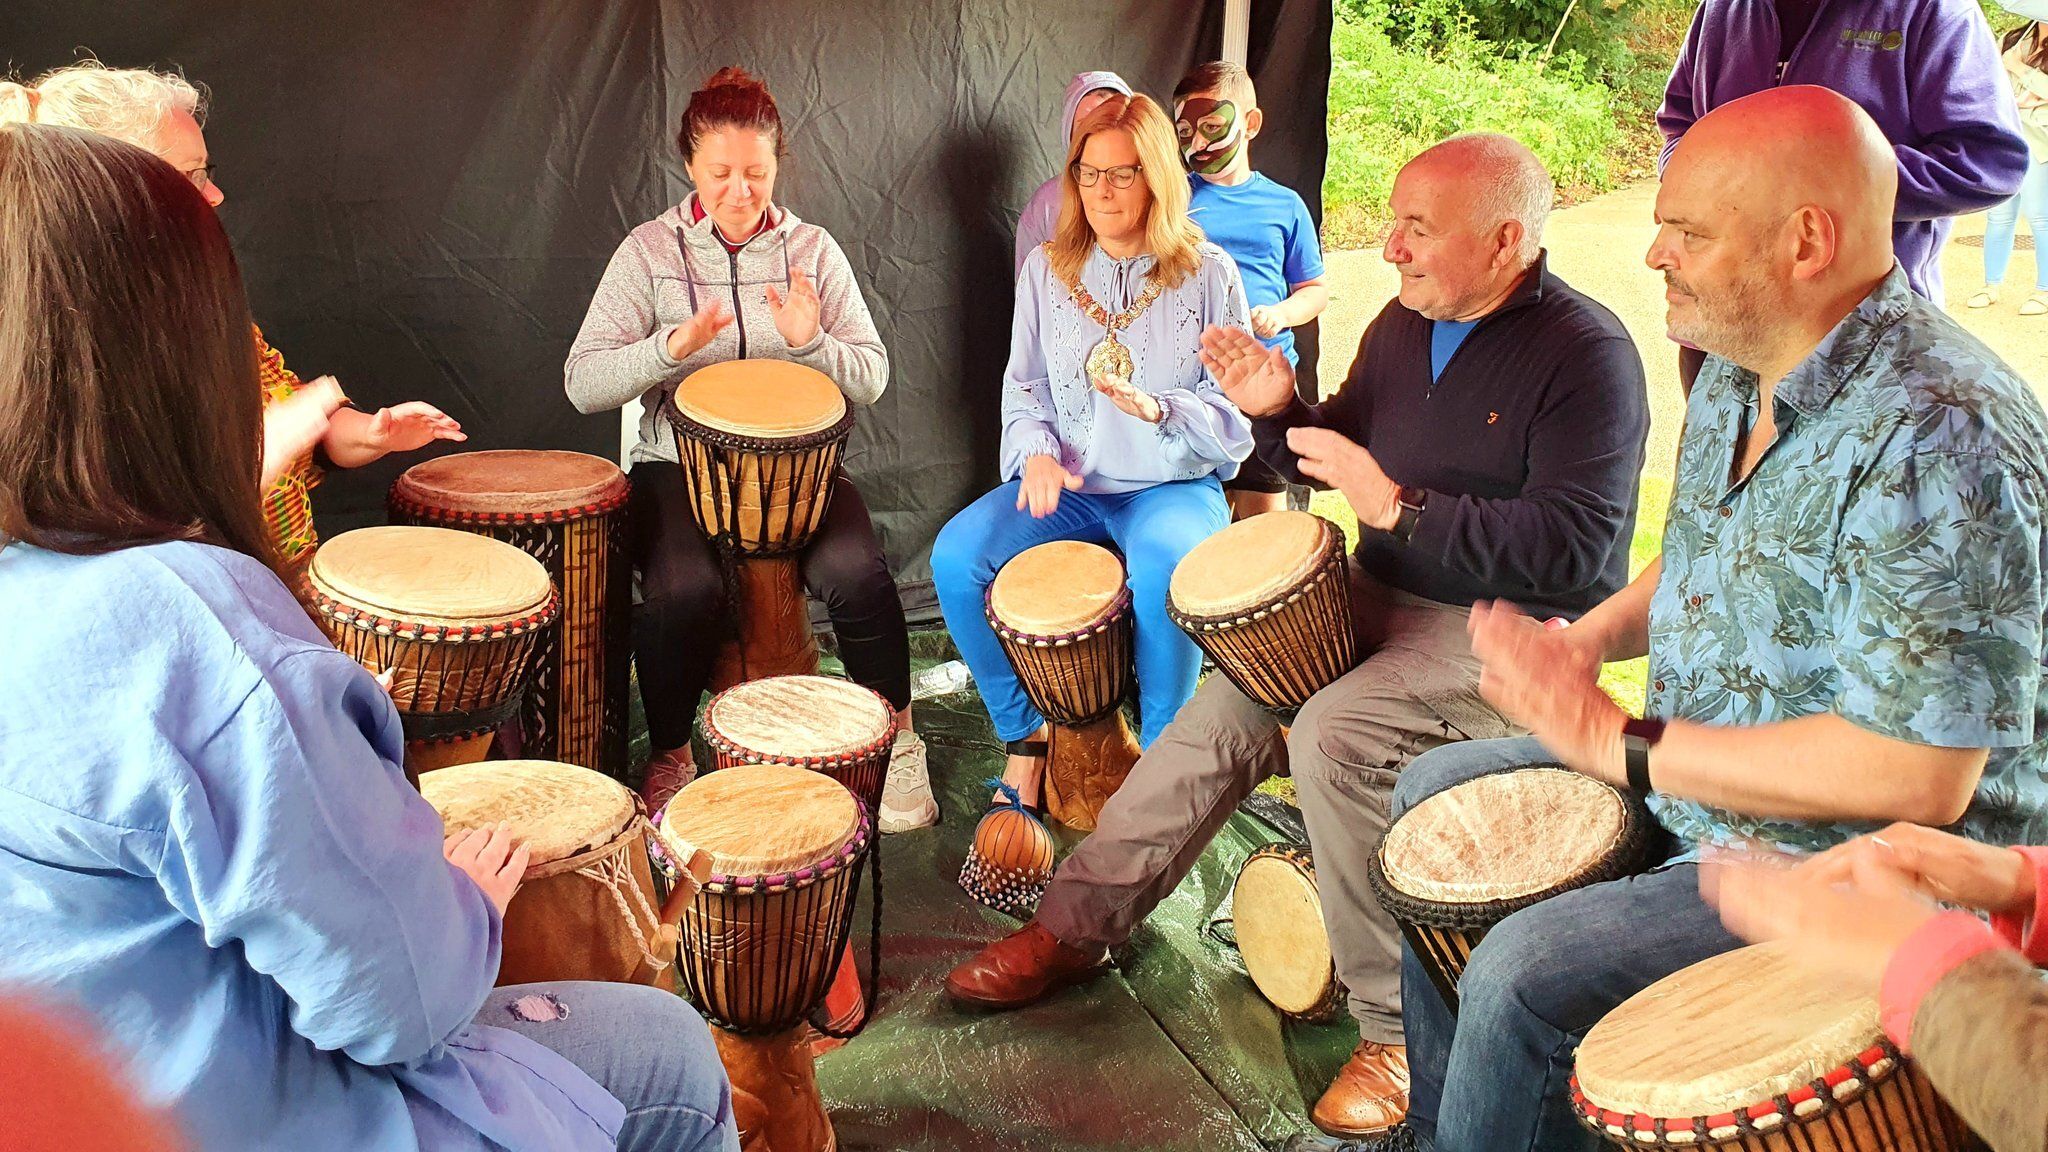 DRUMMING: Lord Mayor Tina Black joined local families for the fun day